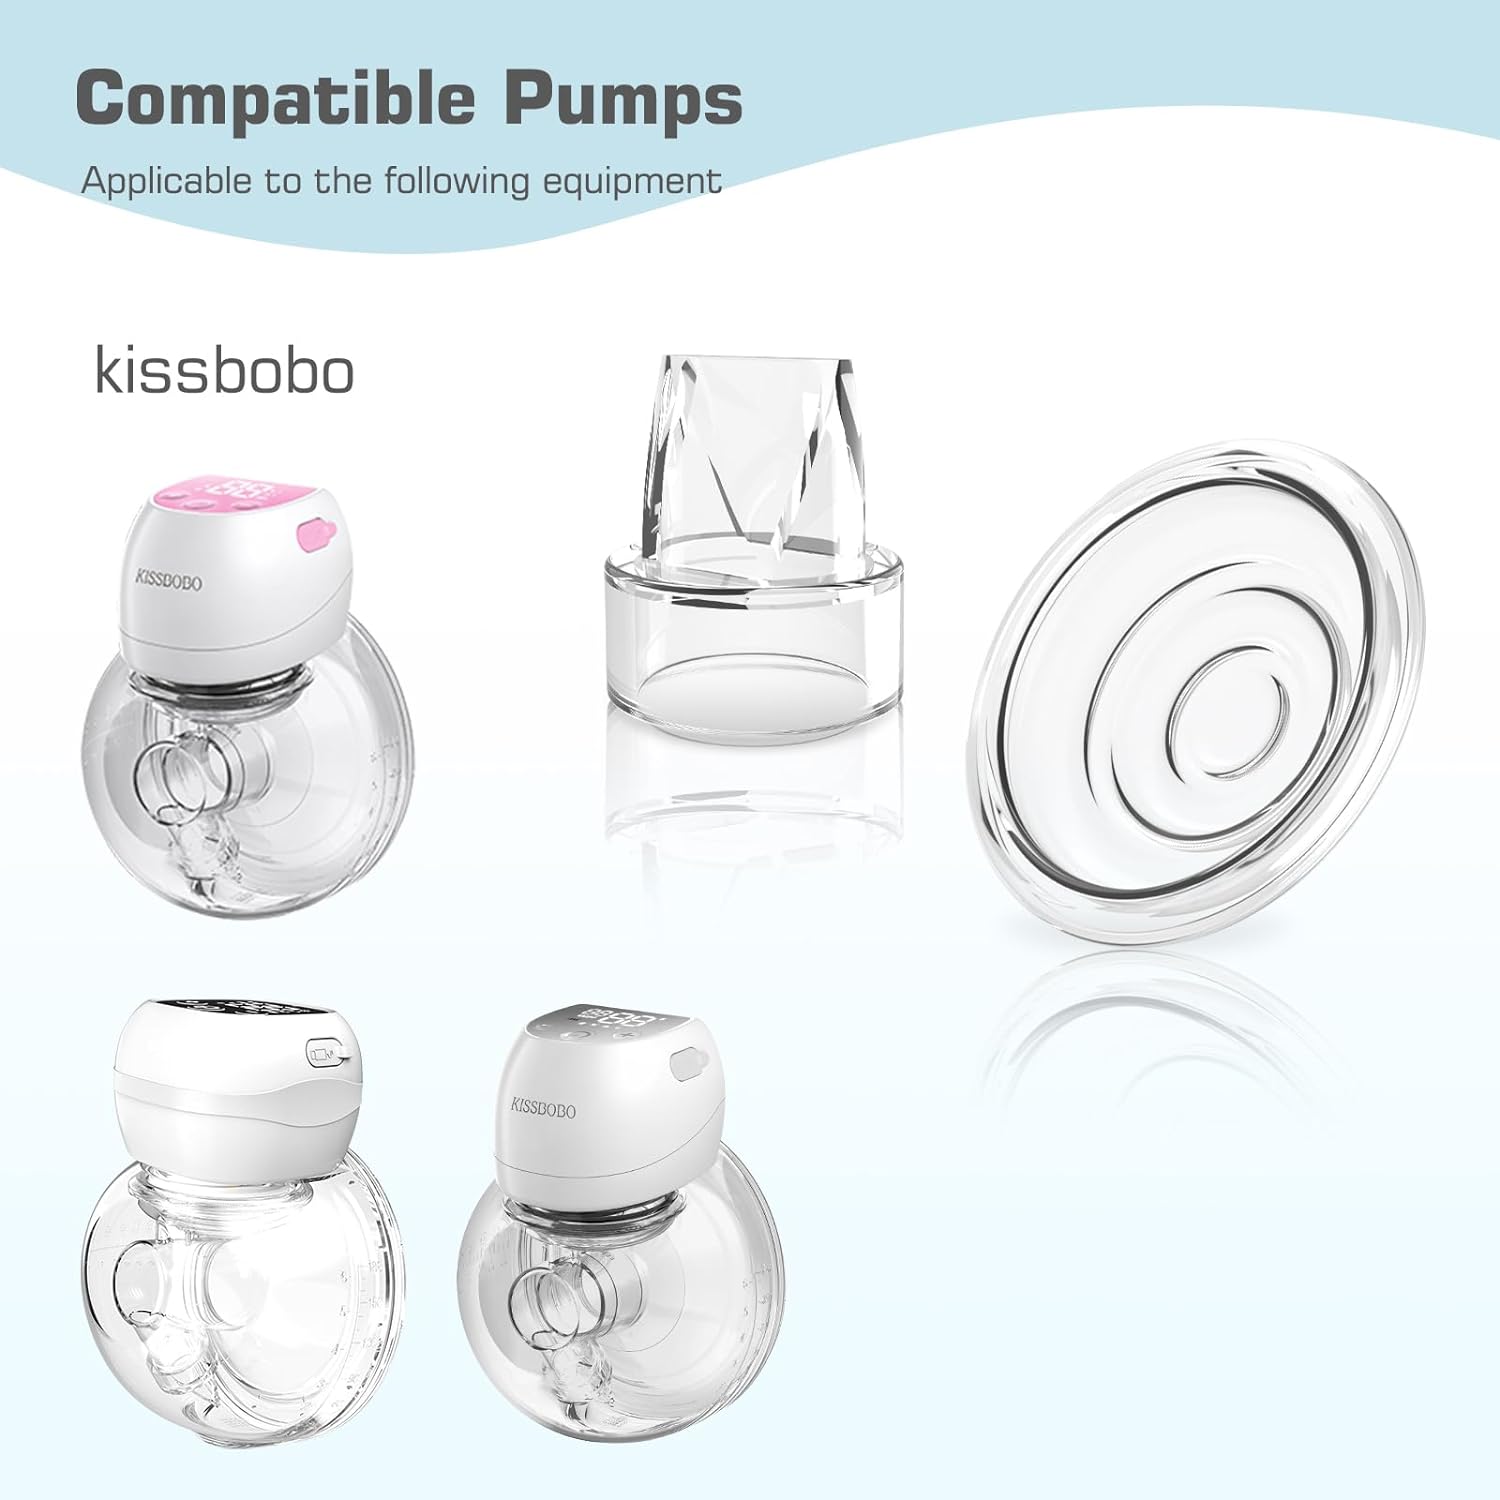 Kissbobo 4 pc Duckbill Valves, Compatible with KISSBOBO Wearable BreastPumps Replace Valves. Replace Pump Parts/Accessories-2